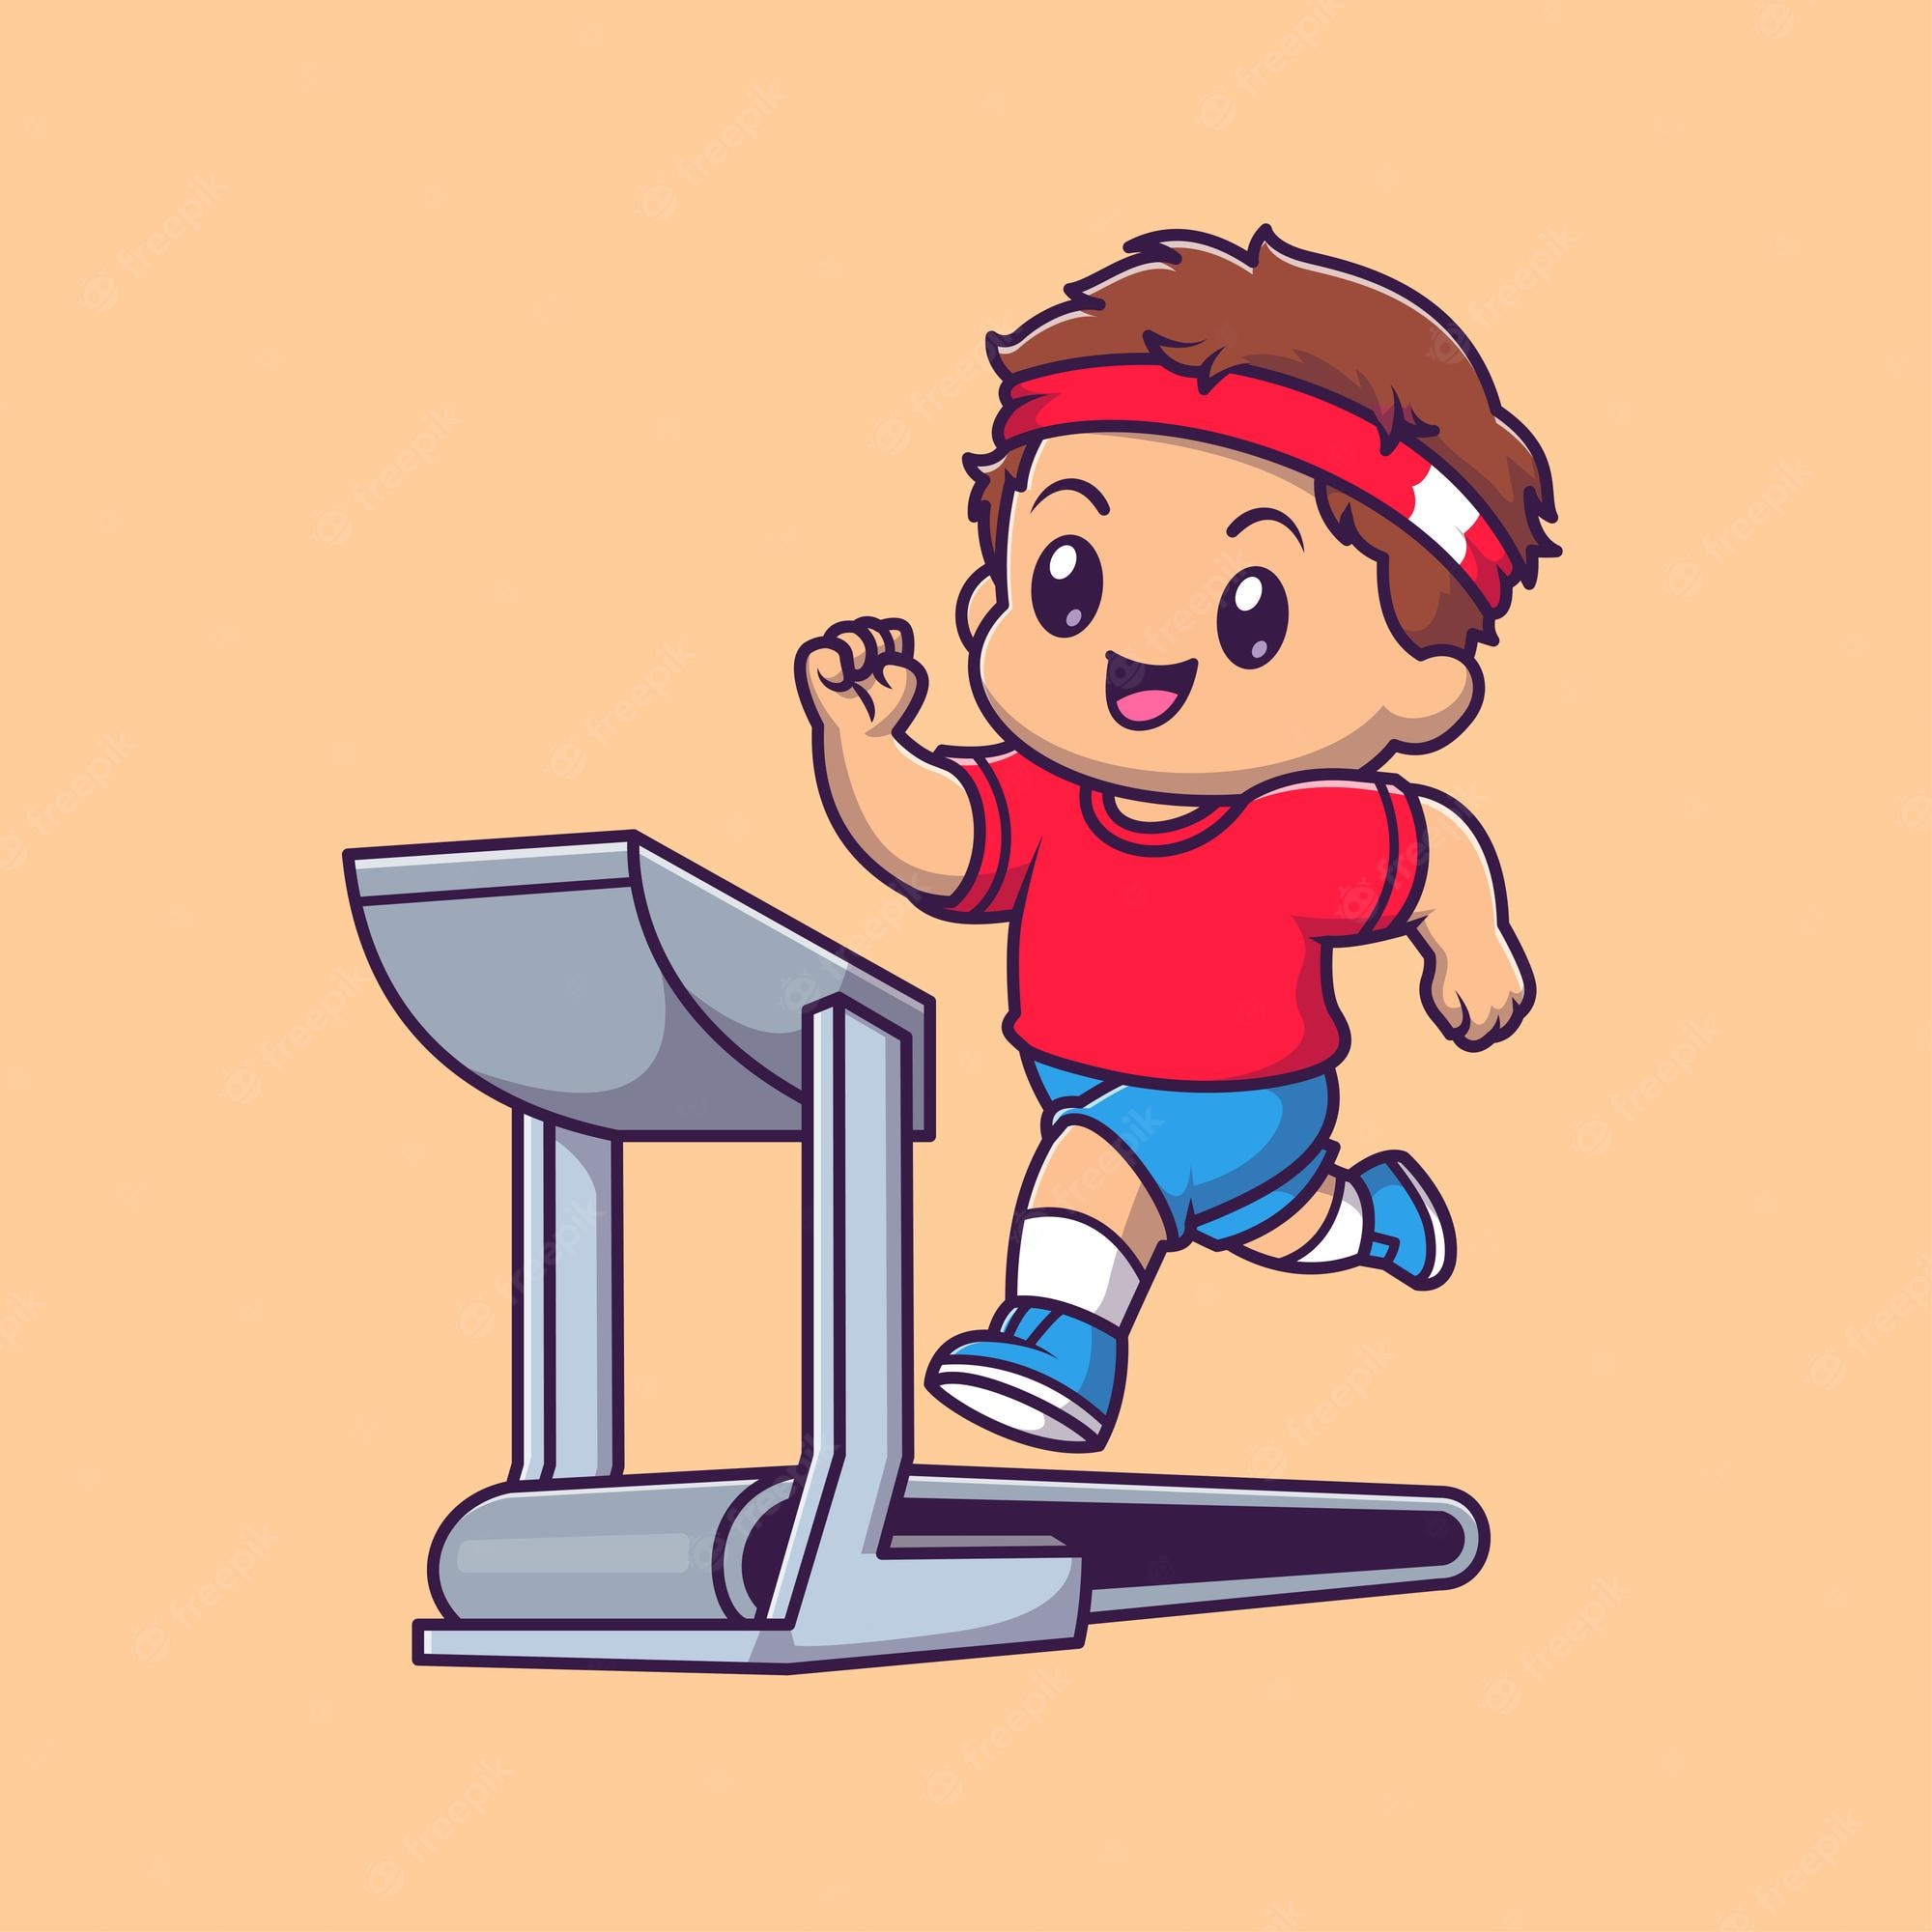 Exercise Fitness Centre Cartoon Treadmill Clip Art, PNG, 512x512px ...